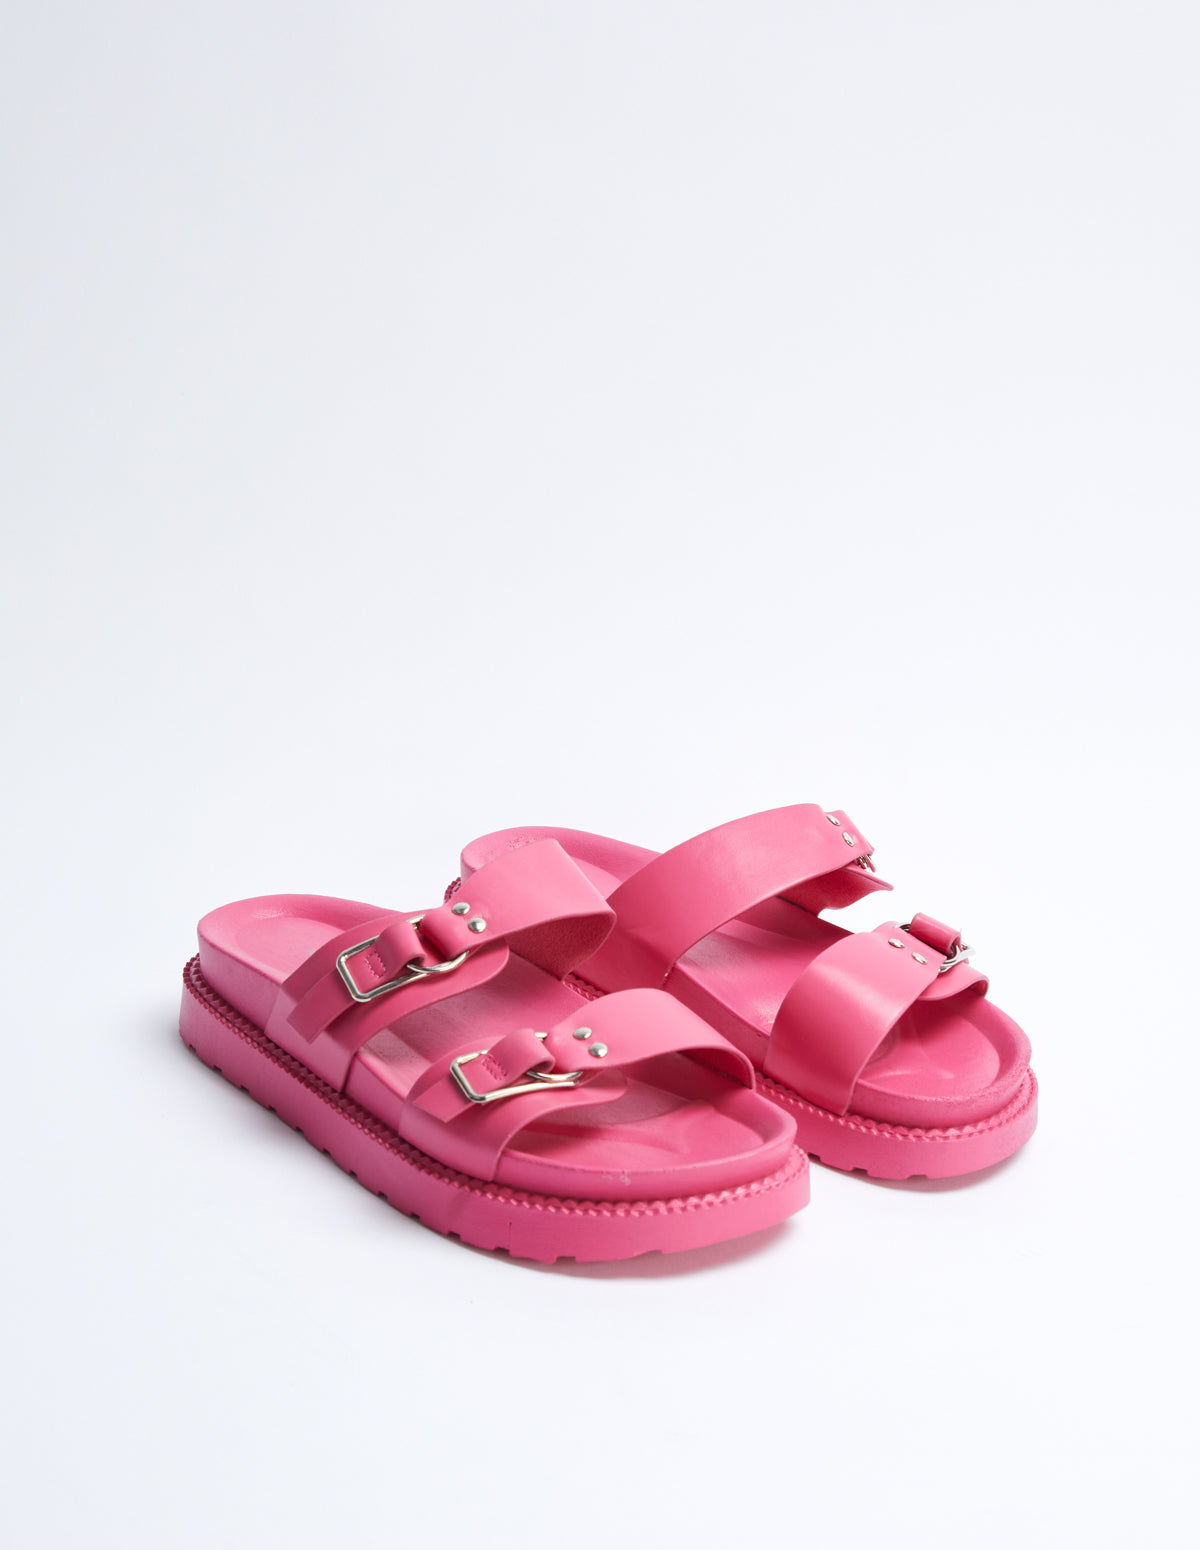 Two Strap Buckle Sandals - Aug